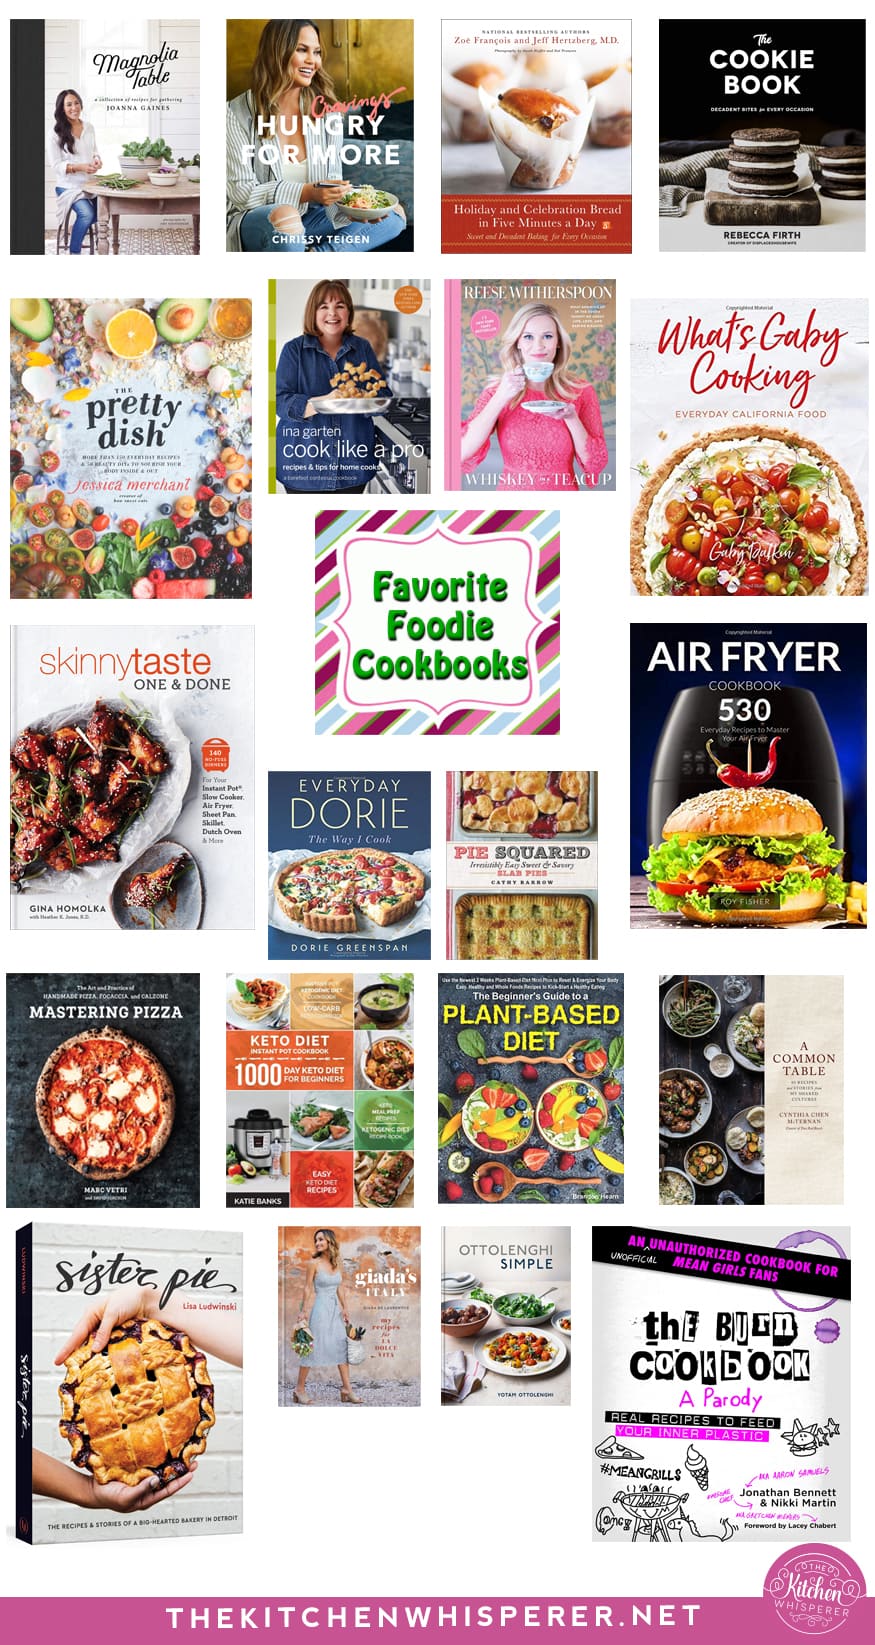 2018 Holiday Gift Guide: Favorite Foodie Cookbooks